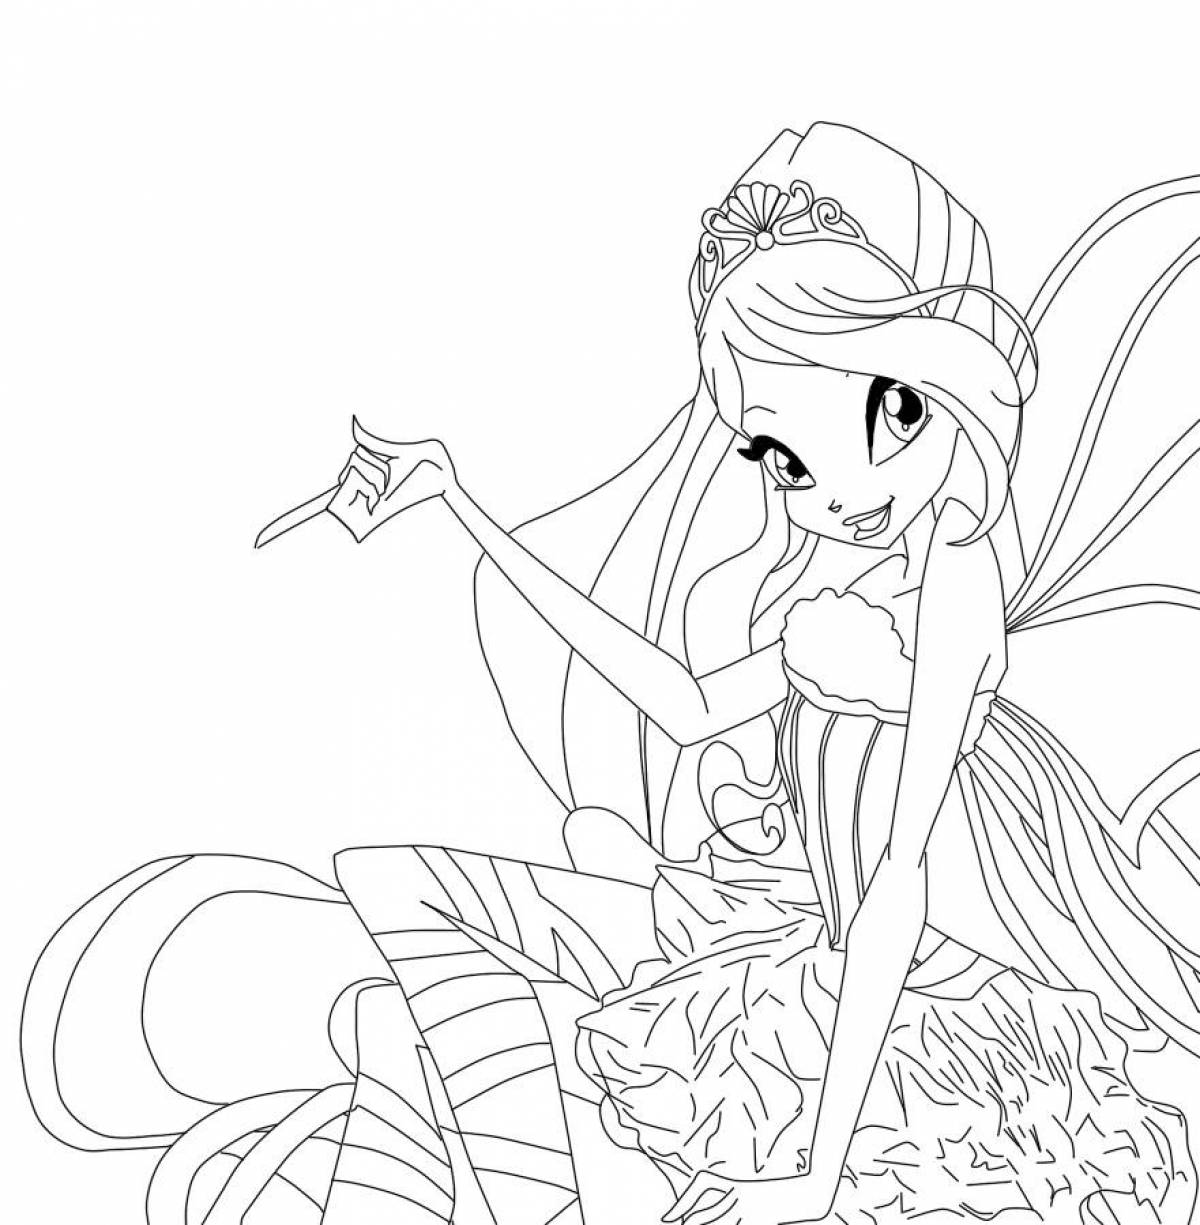 Winx club live coloring page